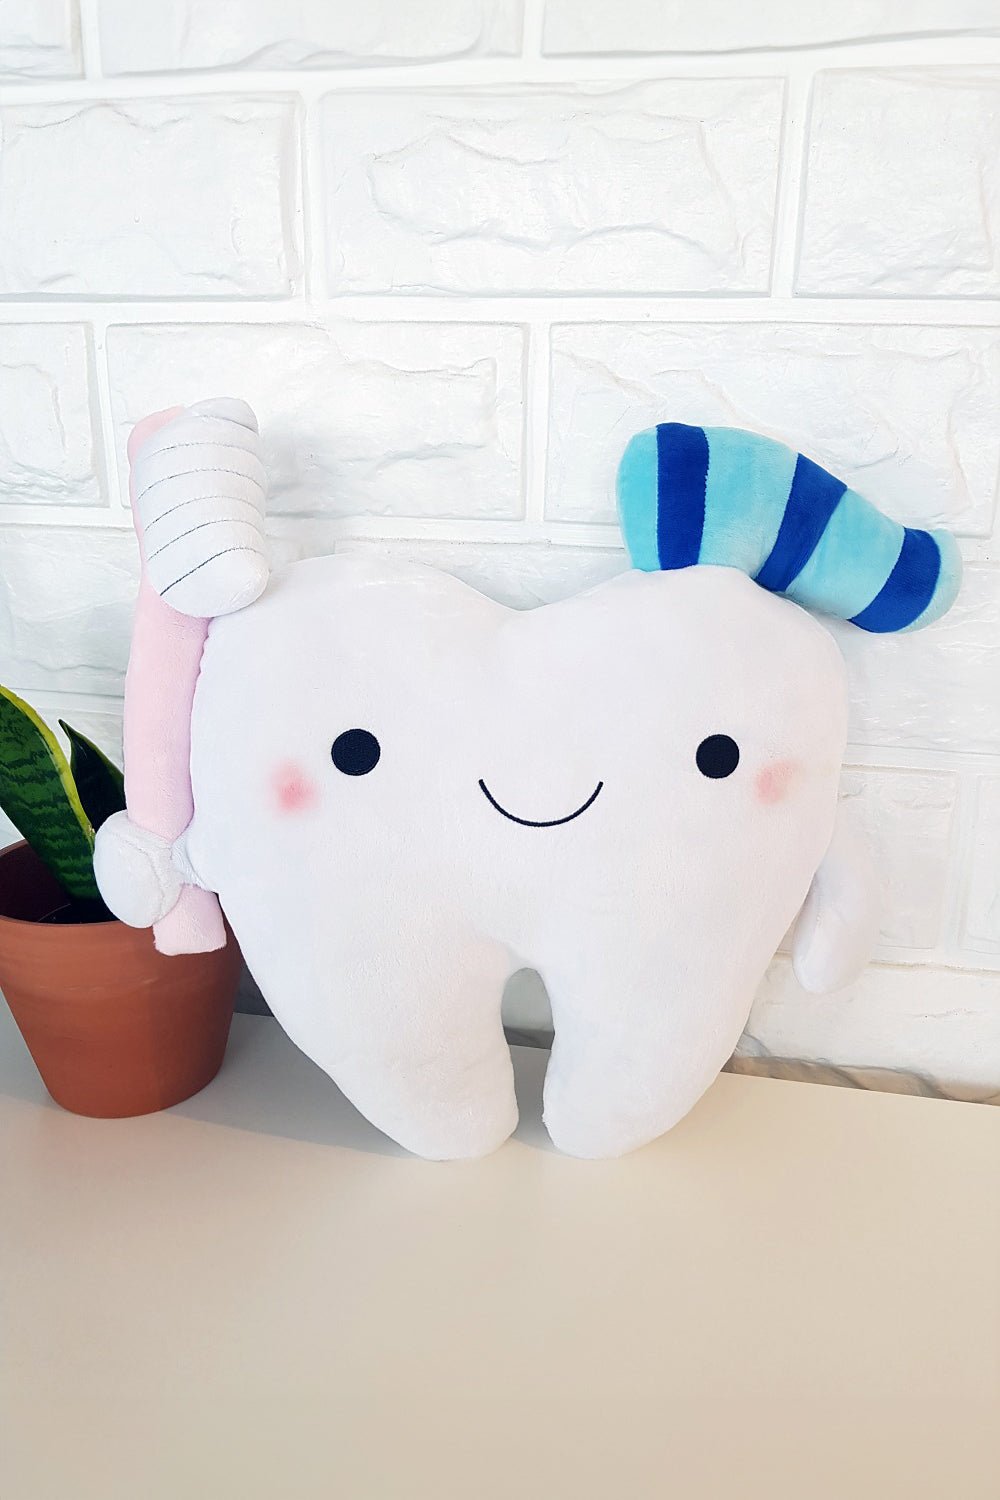 products-toothpillow2-367457-jpg